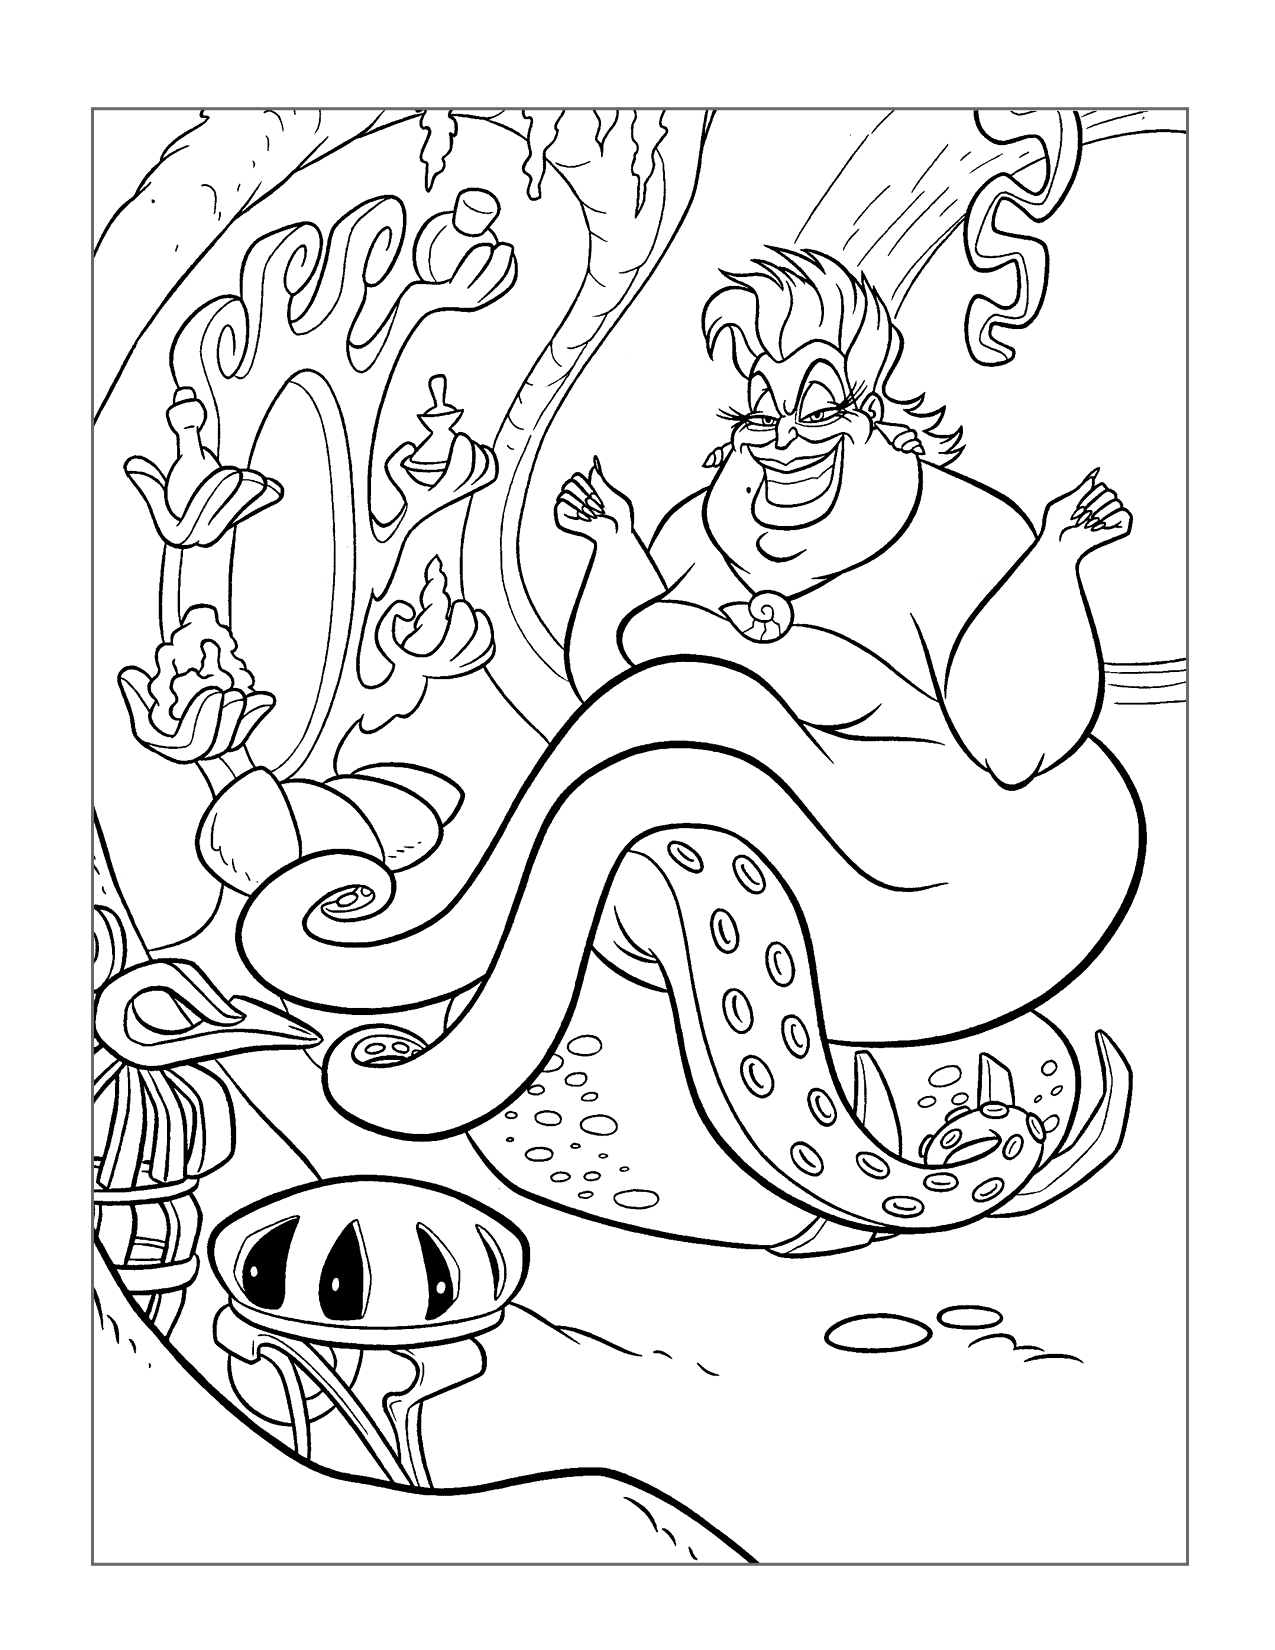 Ursula Little Mermaid Coloring Page